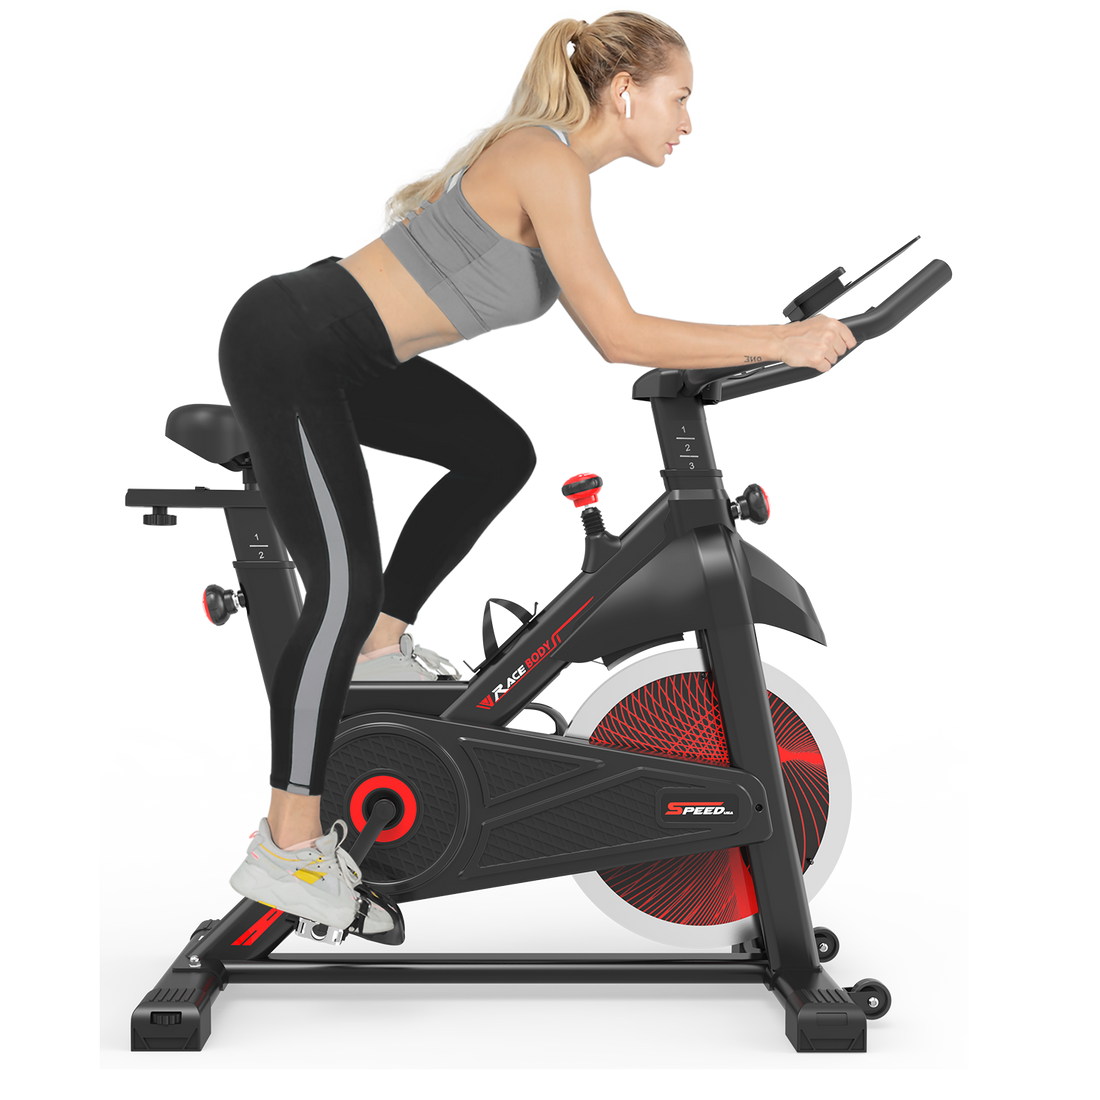 Indoor Cycling Exercise Bike Stationary, Home Gym